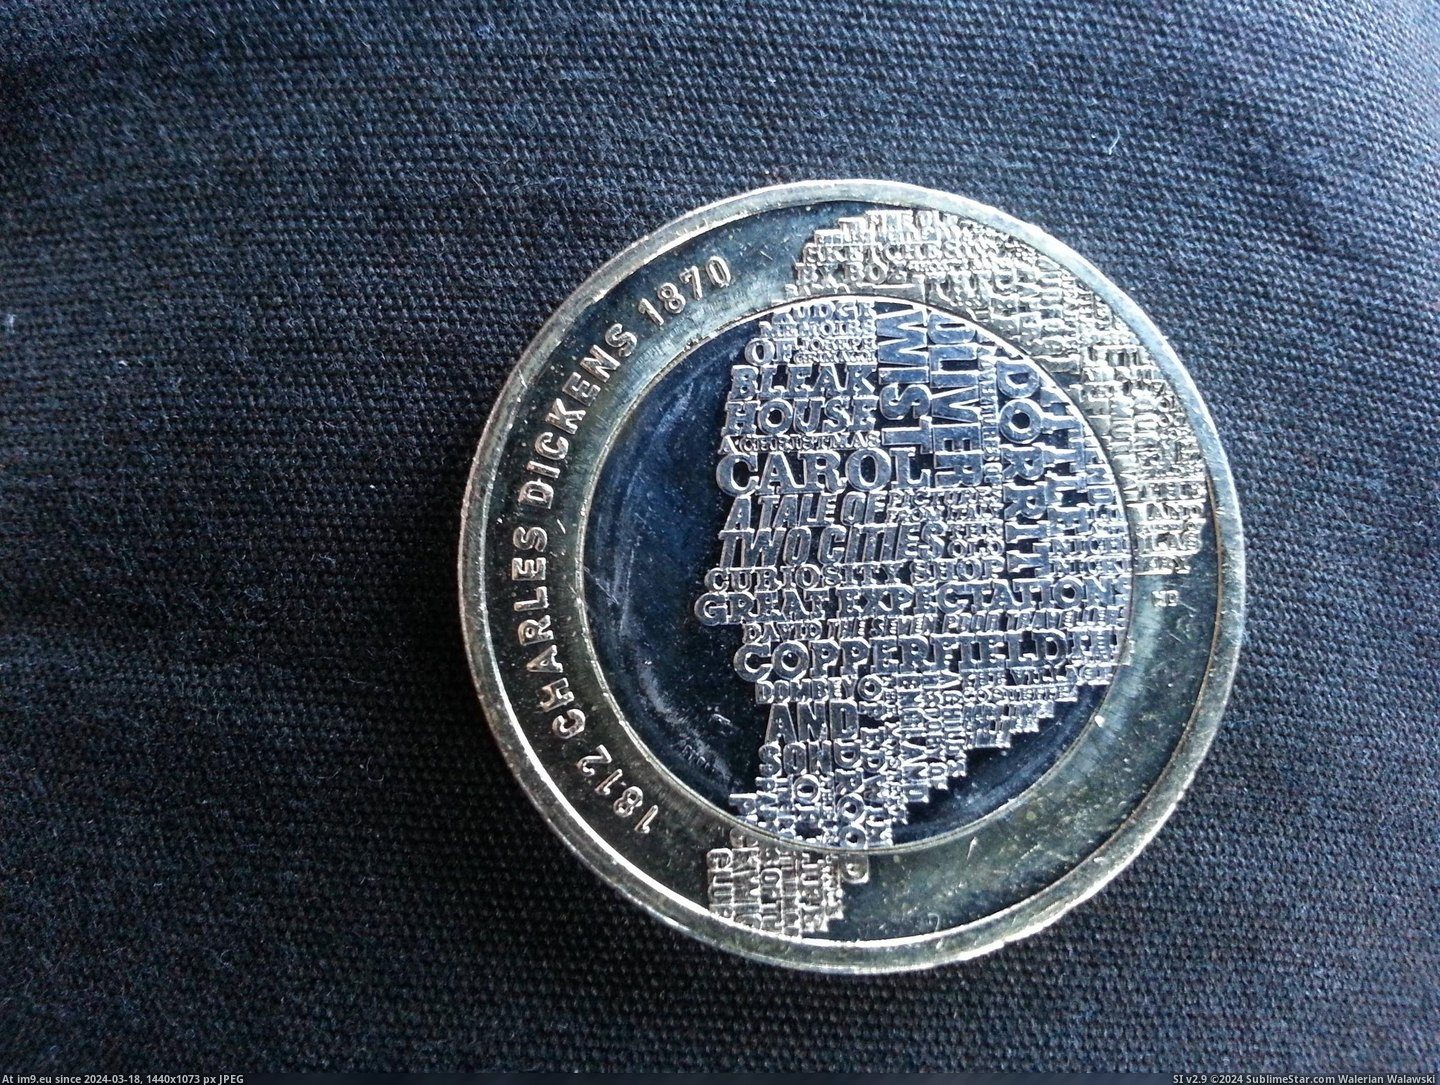 #Was #Thought #Got #Charles #Disappointed #Coin #Darwin #Change #Bit #Wasn [Mildlyinteresting] Got this £2 coin in my change today, thought it was Charles Darwin, bit disappointed it wasn't. Pic. (Image of album My r/MILDLYINTERESTING favs))